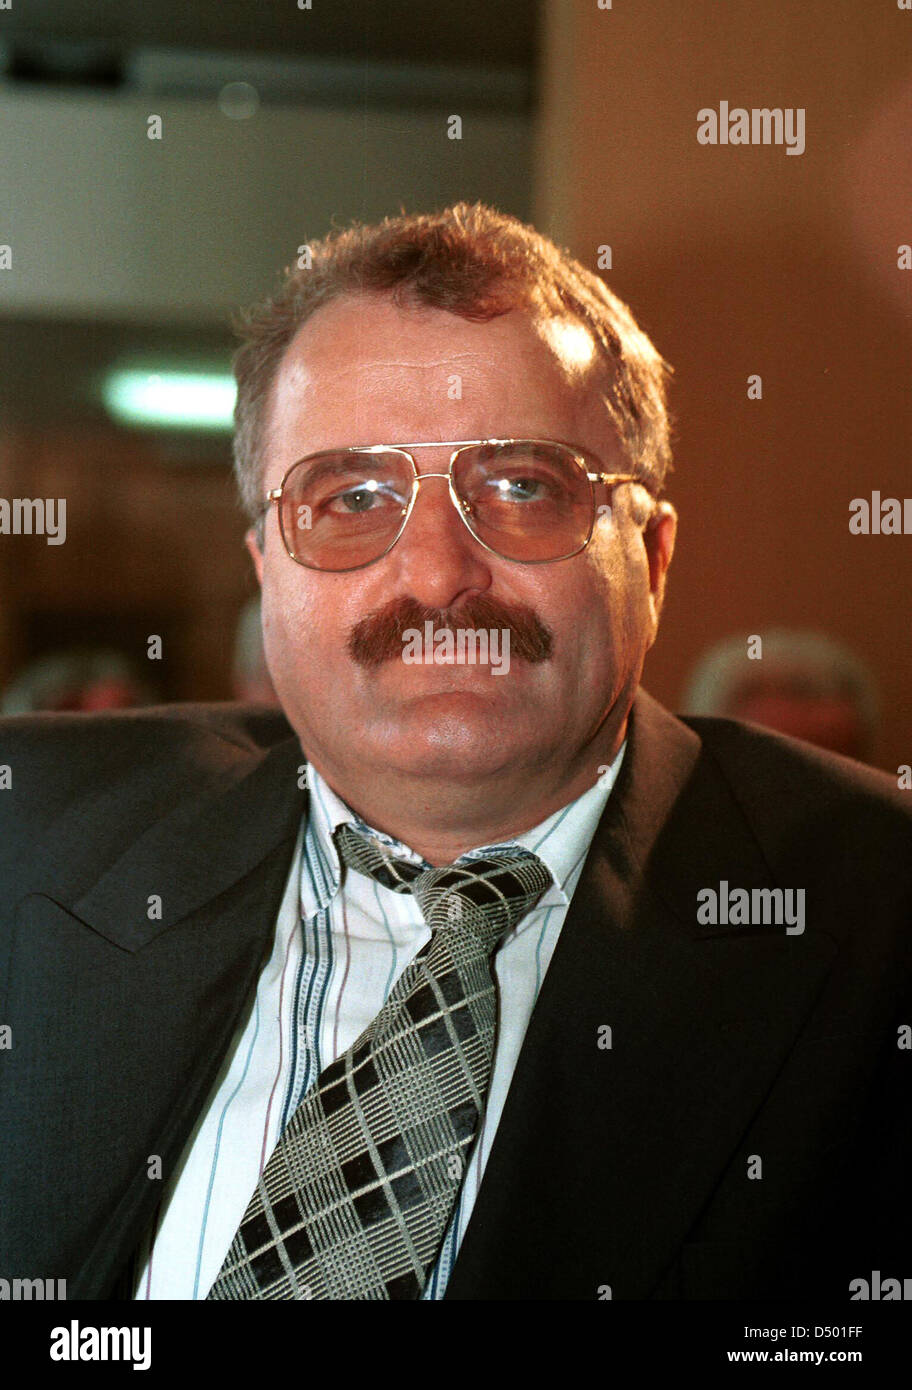 PALE, BOSNIA, 12 JUNE 1996 ---Bosnian Serb prime minister Gojko Klickovic, seen here during a session of the Bosnian Serb parliament. Klickovic is a close ally to Bosnian Serb war criminal Radovan Karadzic, and is suspected of having been one of the chief ideologues behind the Serb ethnic cleansing campaign in Bosnia. It is thought that Klickovic is under secret indictment by the War Crimes Tribunal in the Hugue. Stock Photo